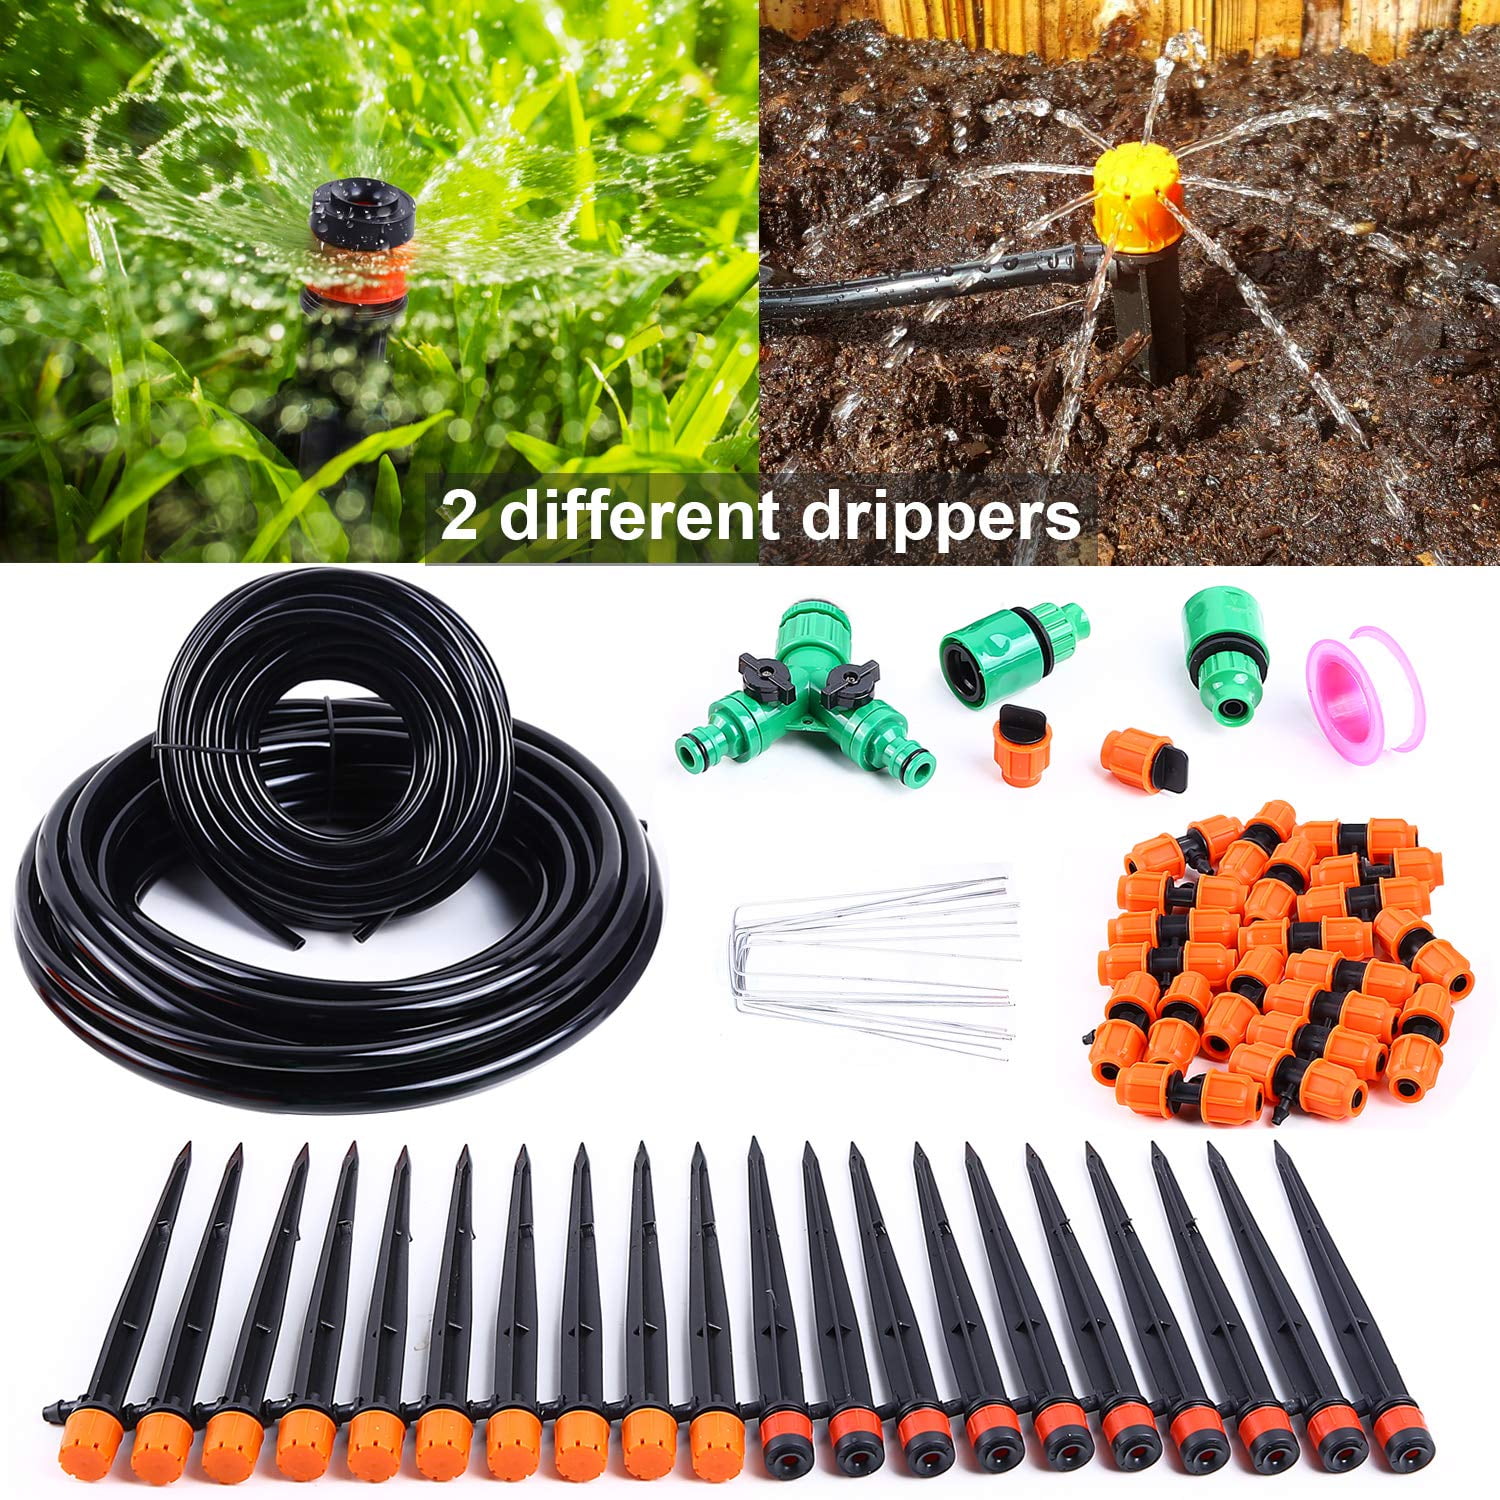 Drip Irrigation System Kit Set For Greenhouse Connectors Hose Drippers Puncher 